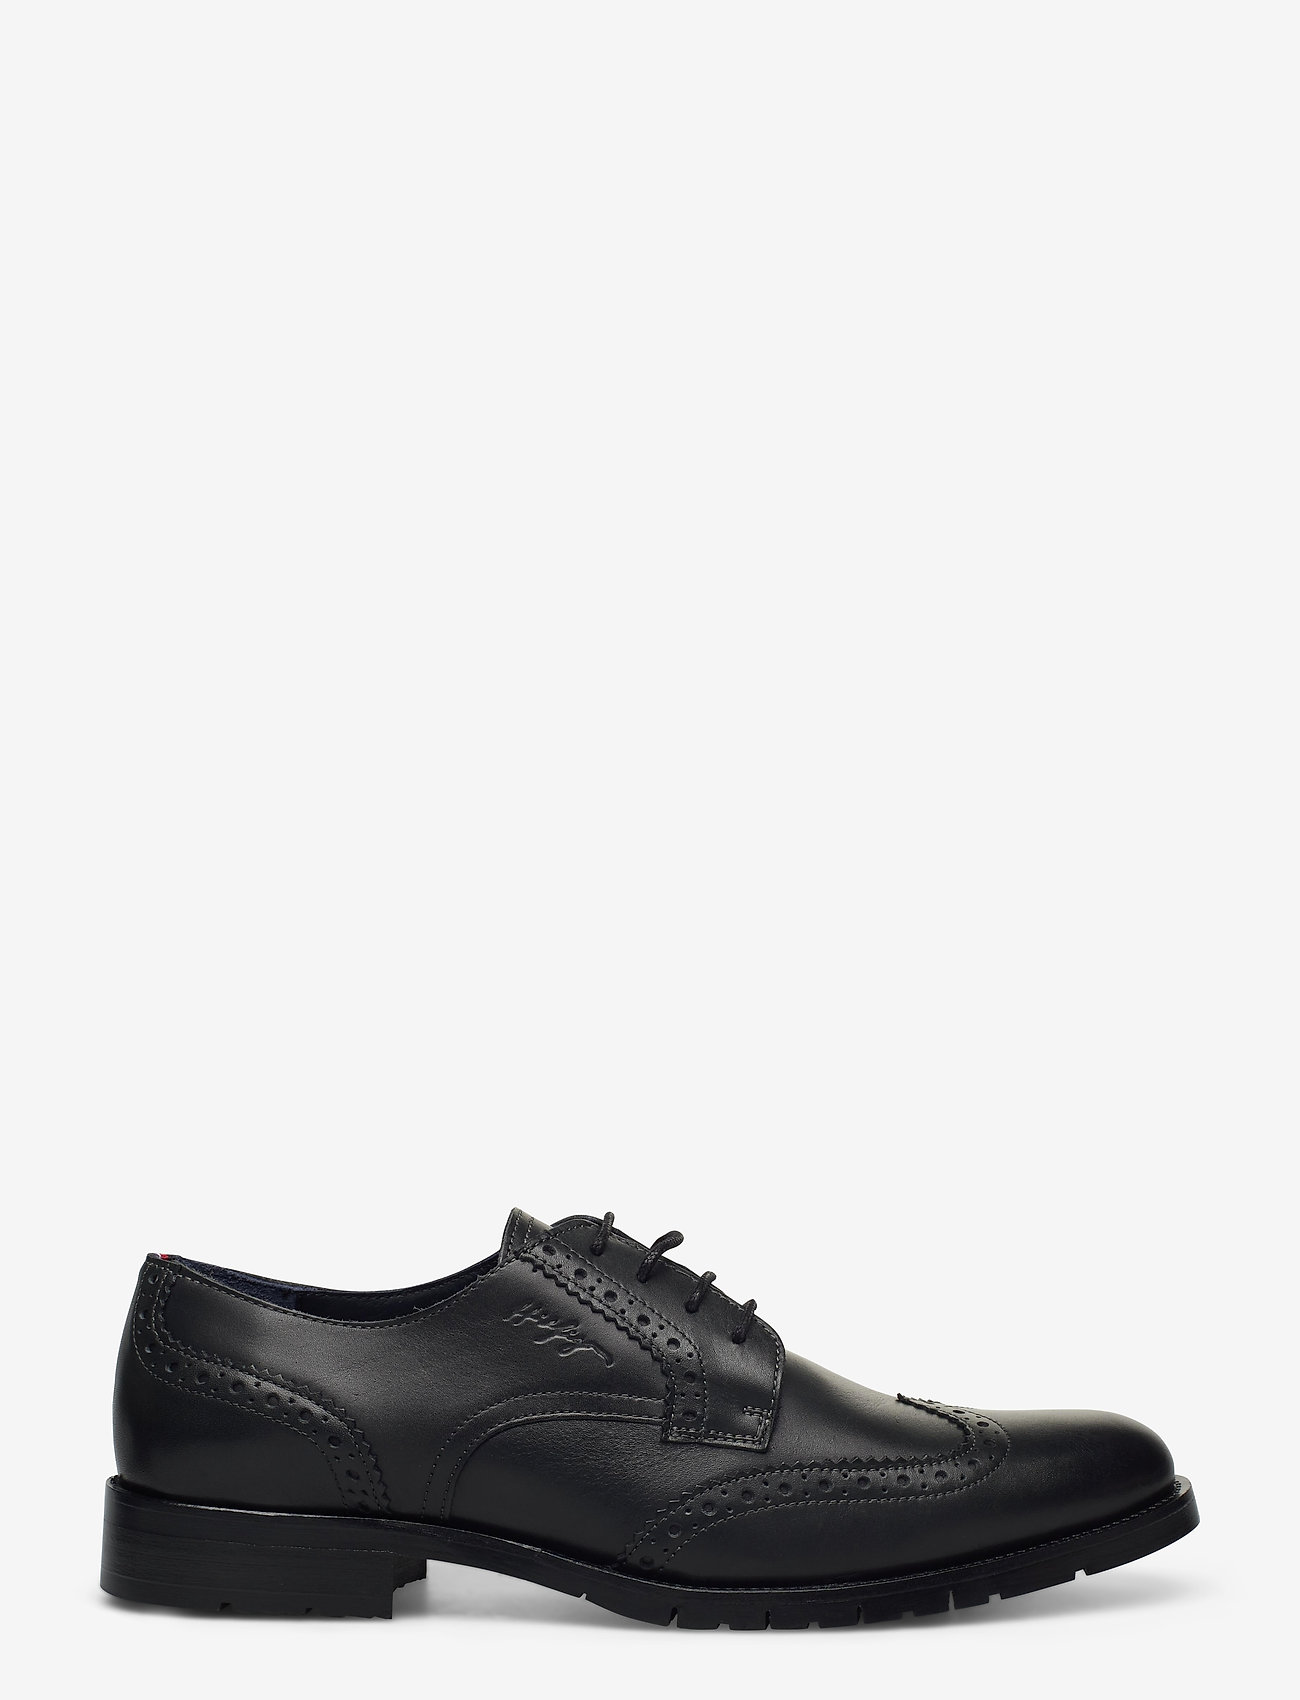 Tommy Hilfiger Brogue Leather Lace Up Shoe - Laced shoes | Boozt.com